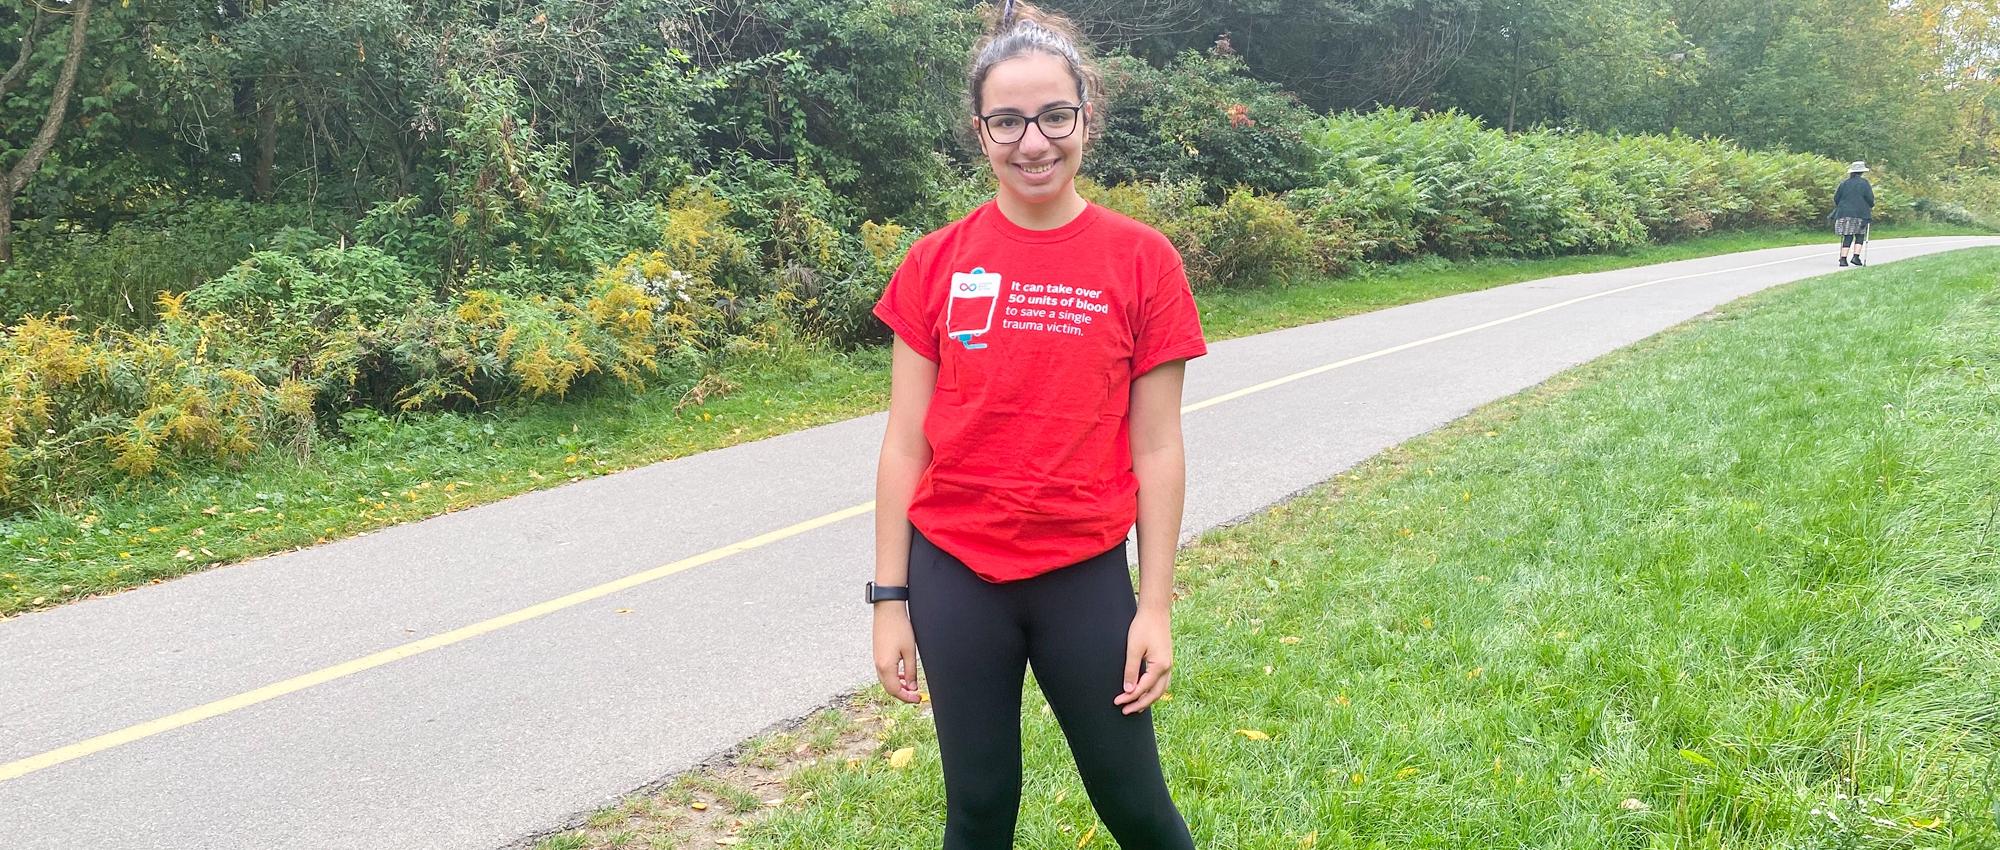 Natalie Pallisco plasma recipient and blood donor posing while out for a run